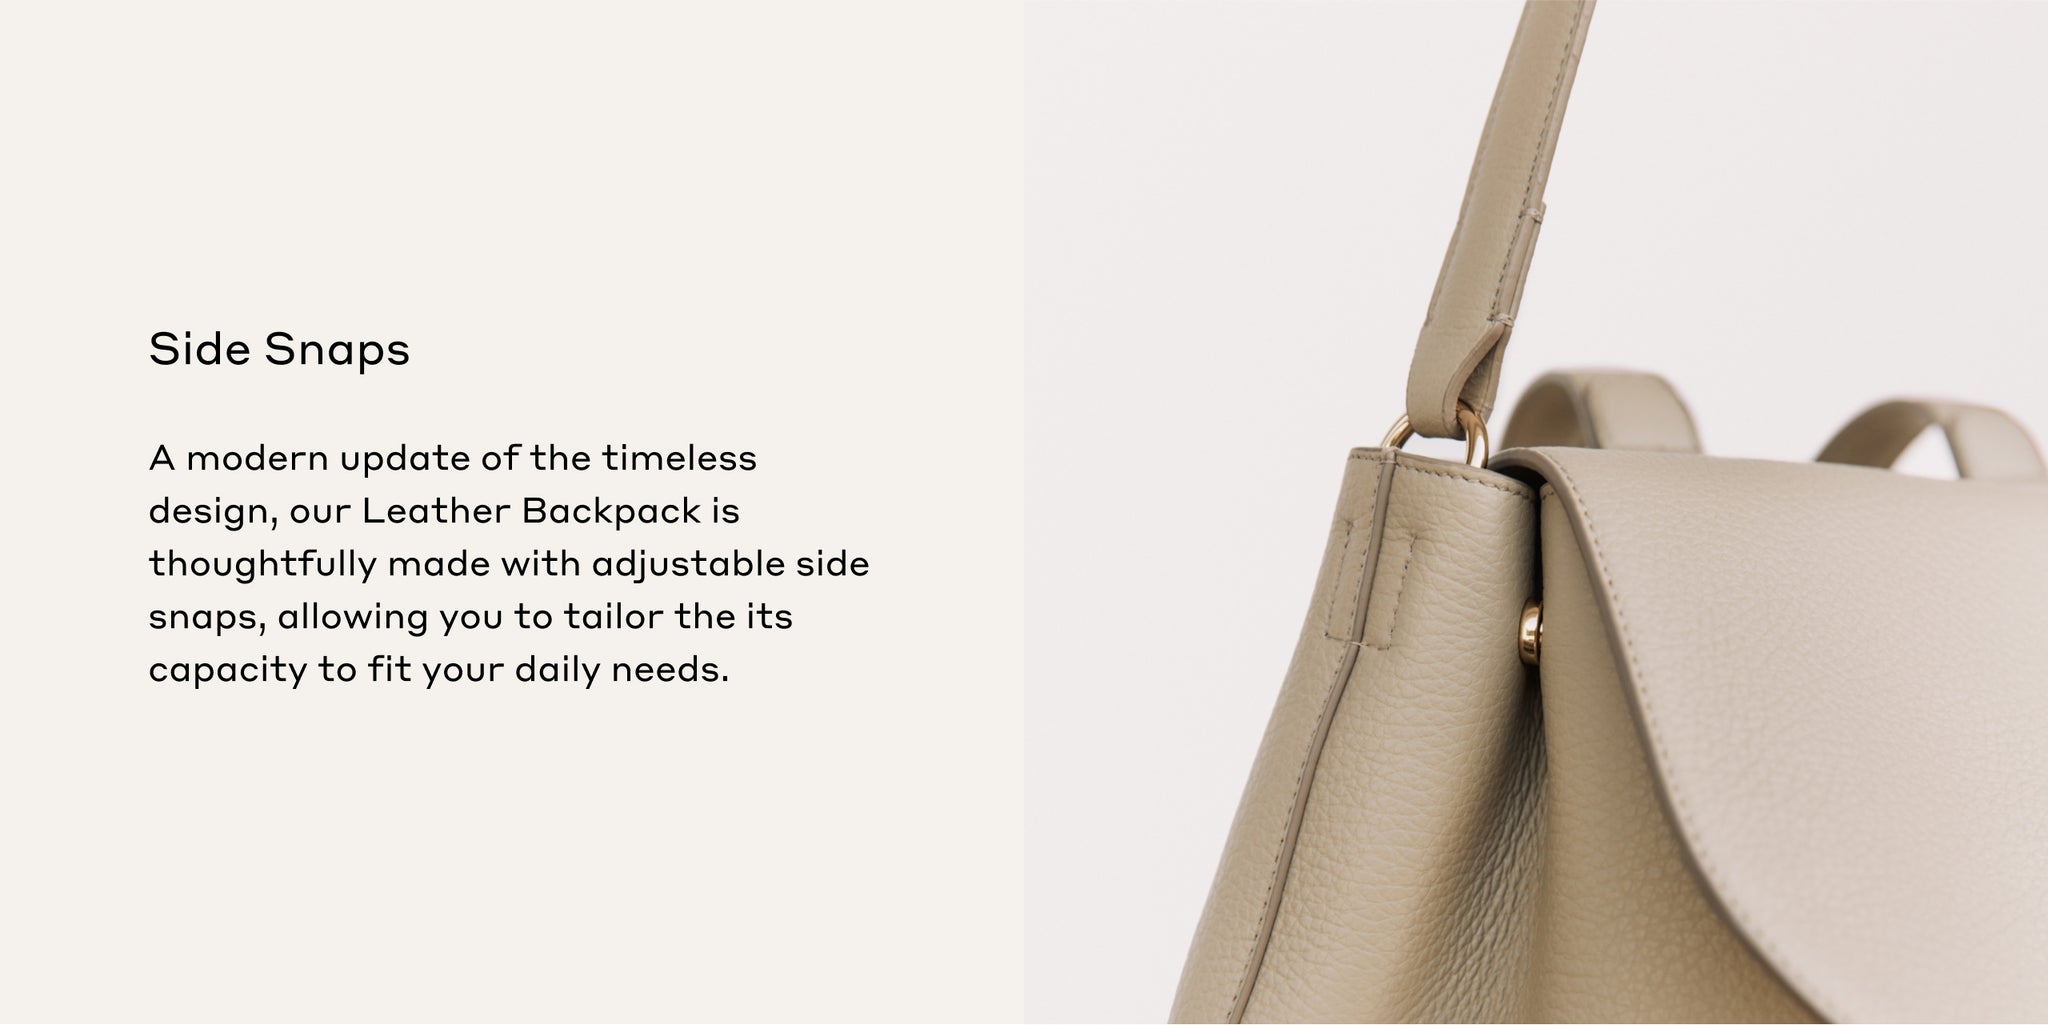 Two images of a leather backpack highlighting its side snaps feature.